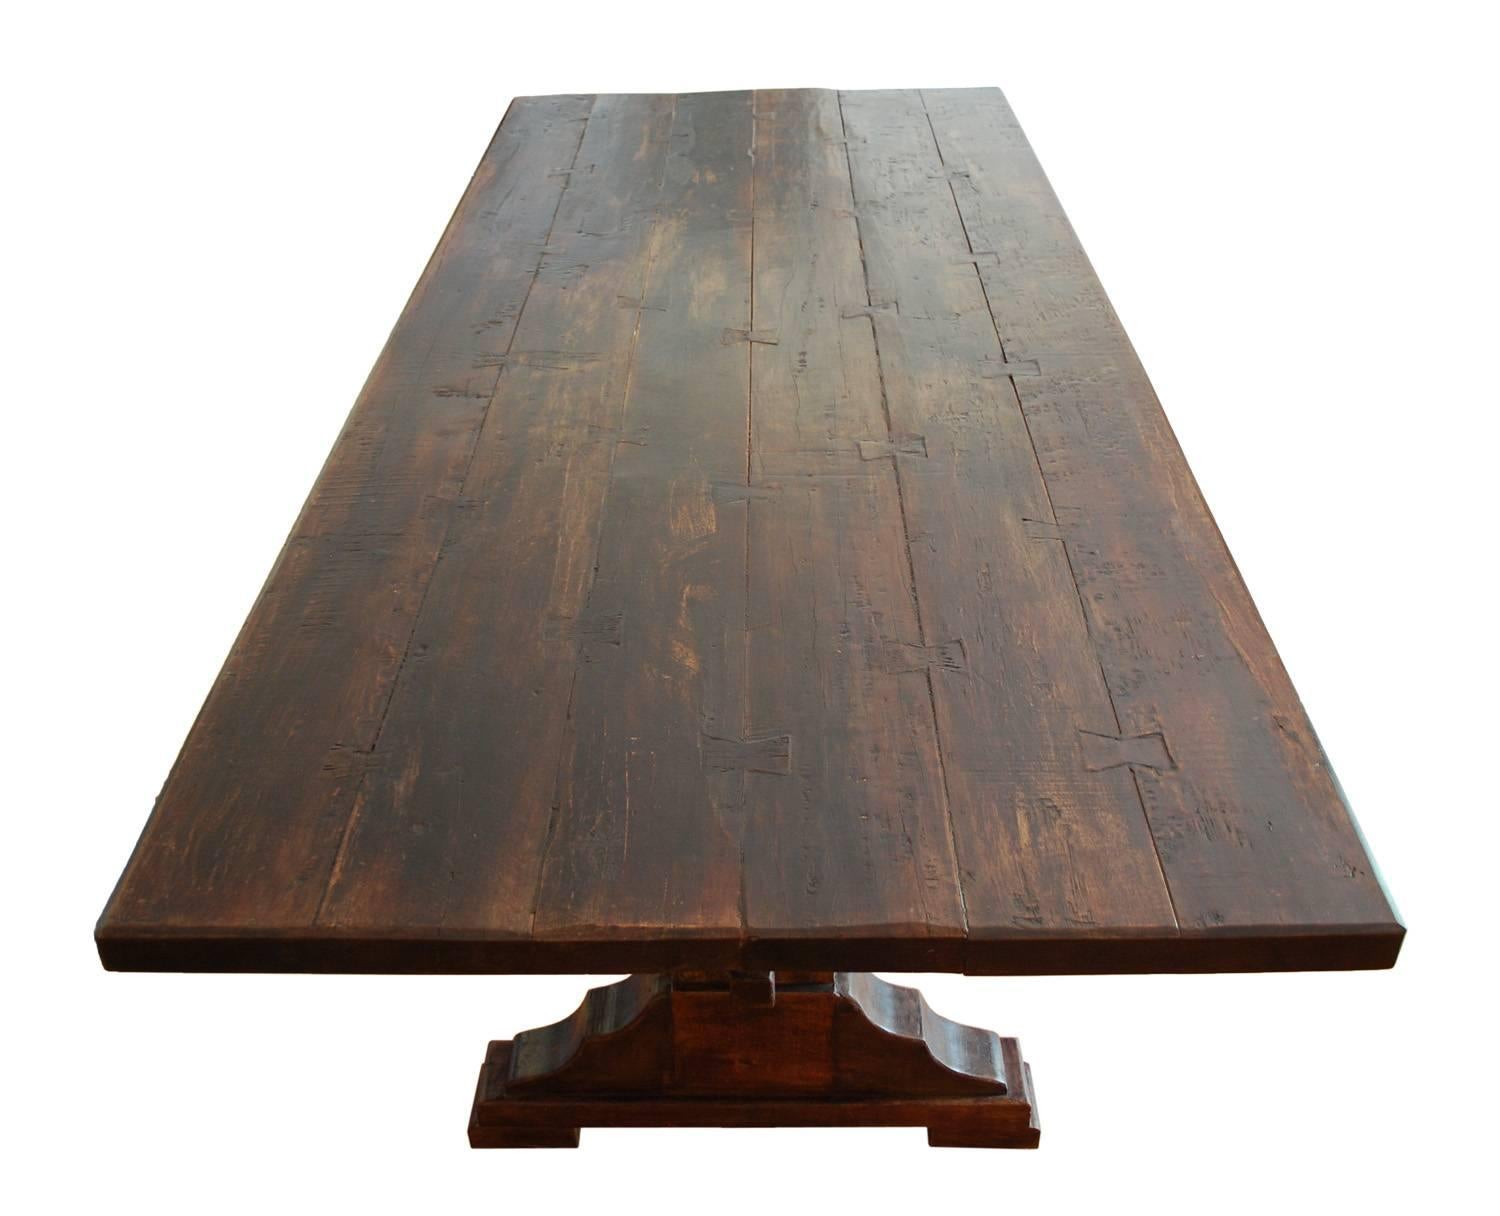 An impressive solid wood teak trestle table with rustic construction in antique style. Five hewn planks are connected with butterfly joints to make the tabletop. Two sturdy legs with broadly scalloped supports are joined by a straight post stretcher